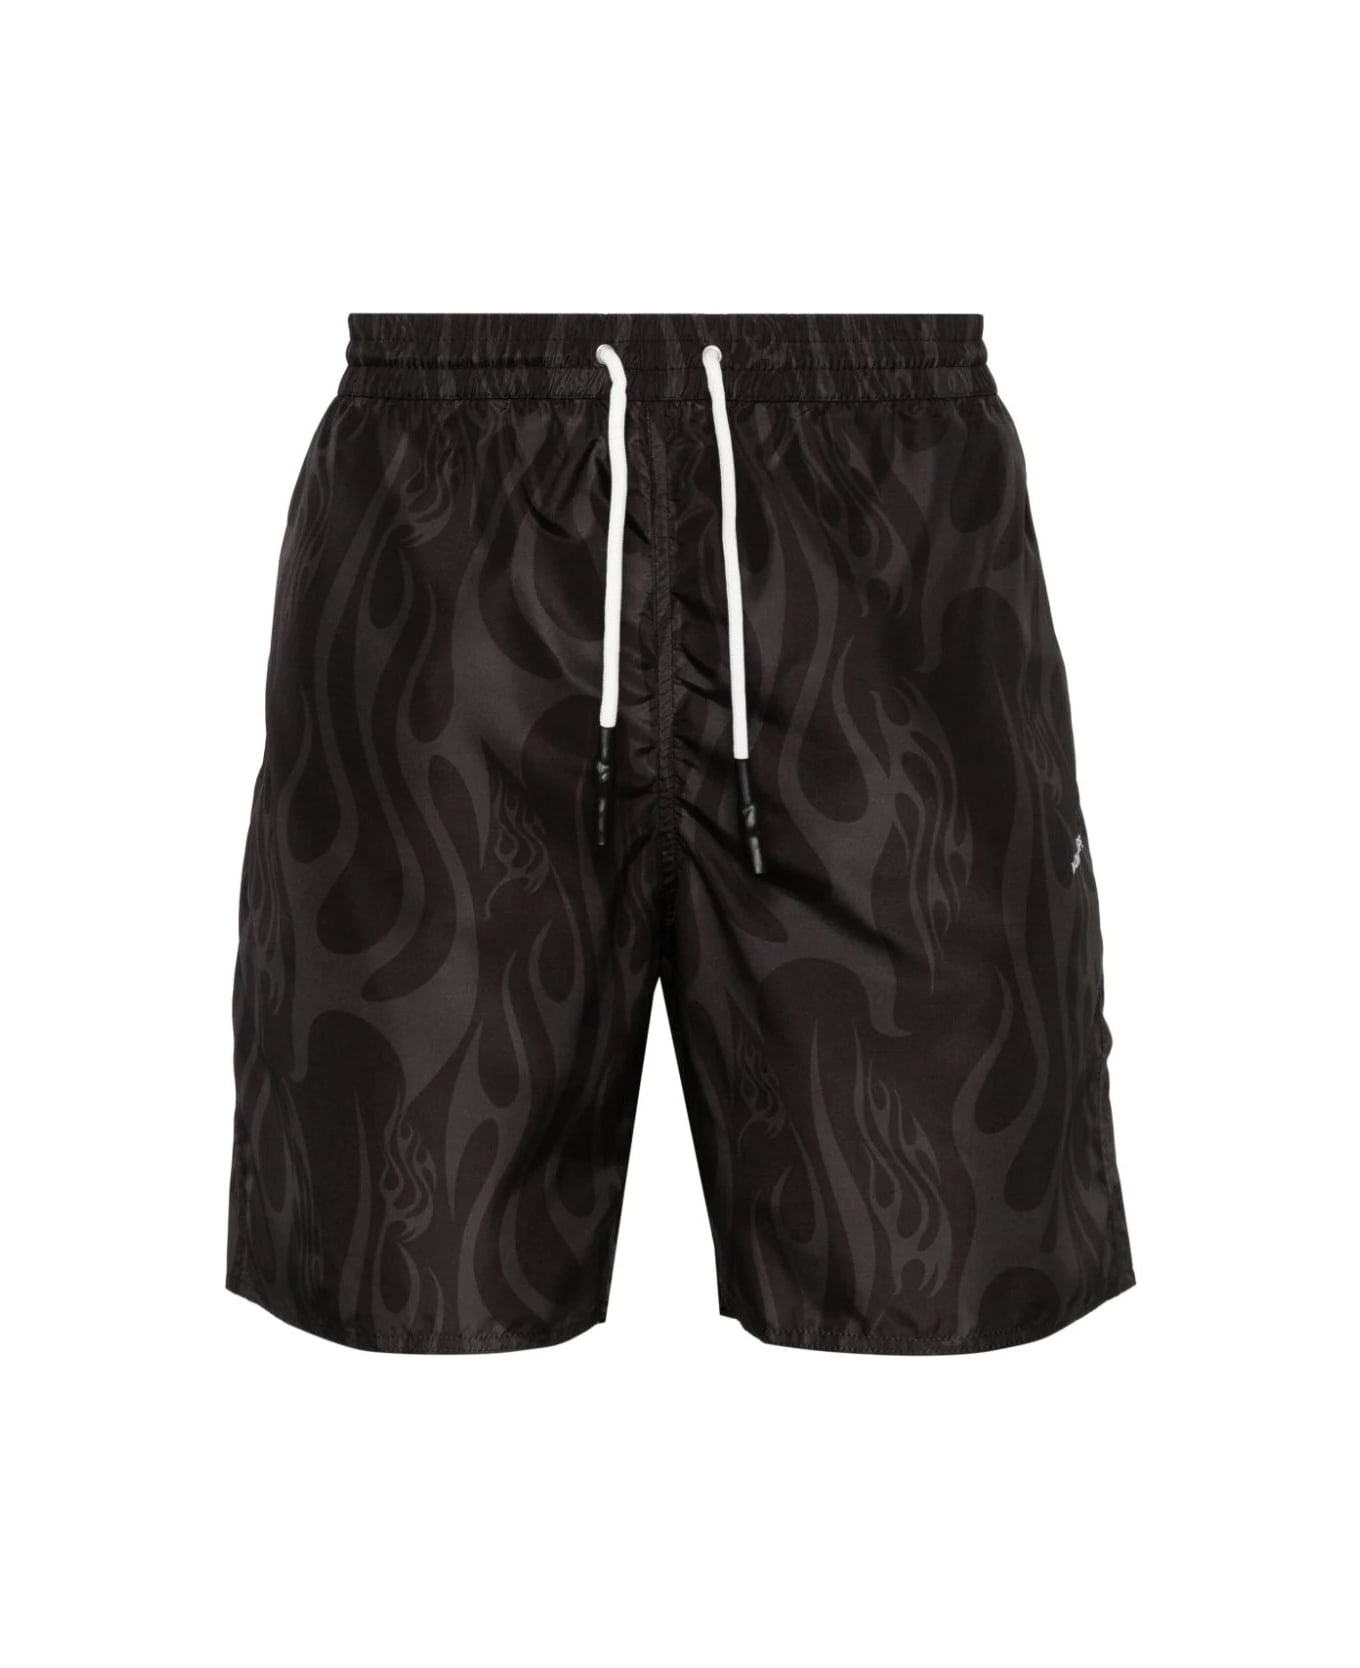 Vision of Super Black Swimwear With All-over Flames - Black スイムトランクス